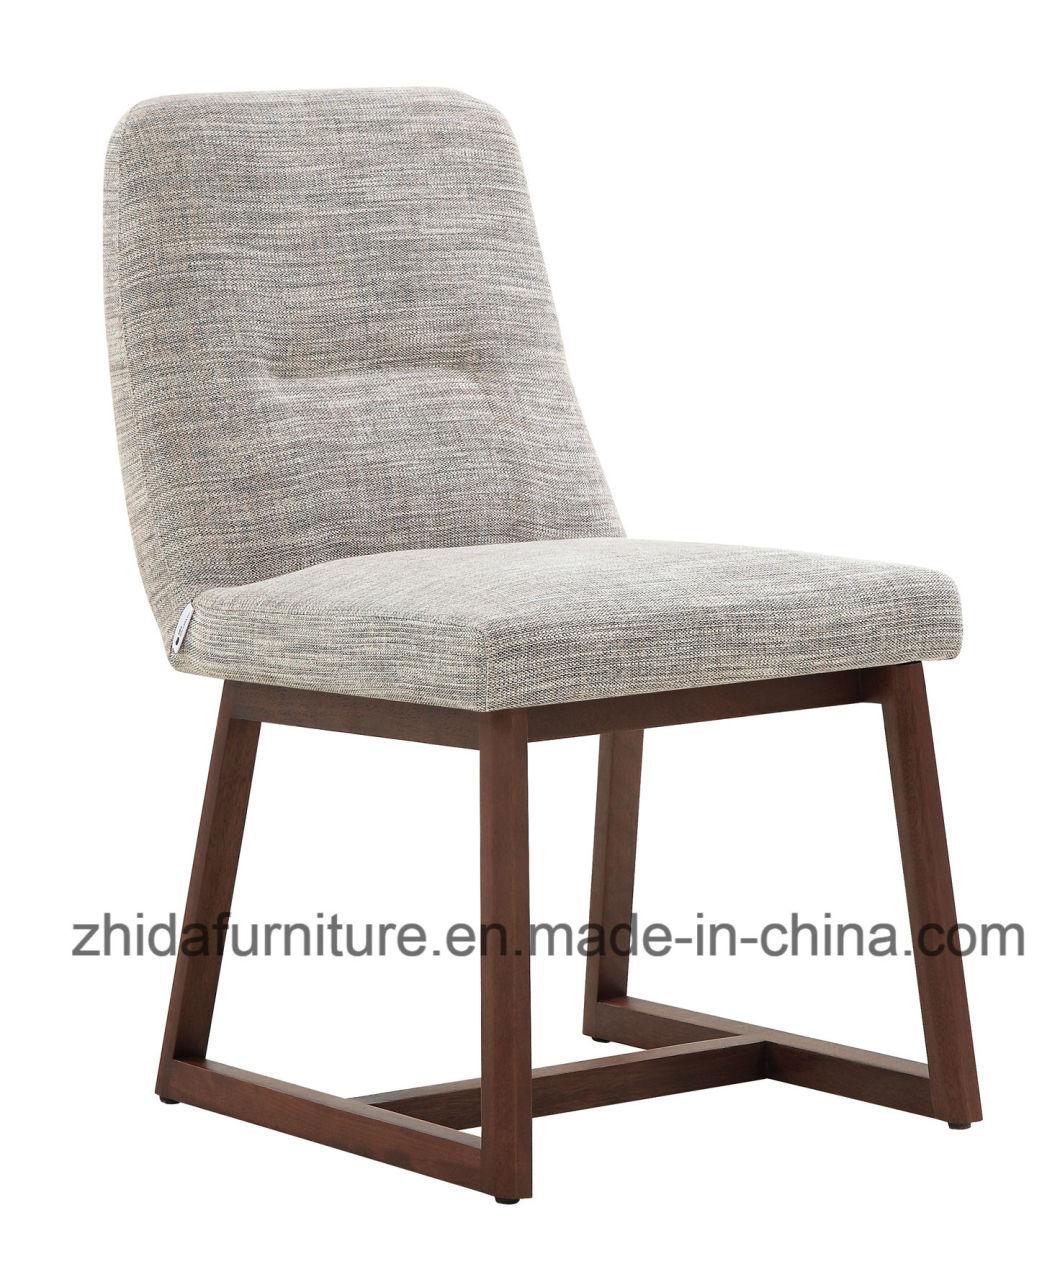 Modern Wood Chair for Dining Room and Restaurant Mc1503